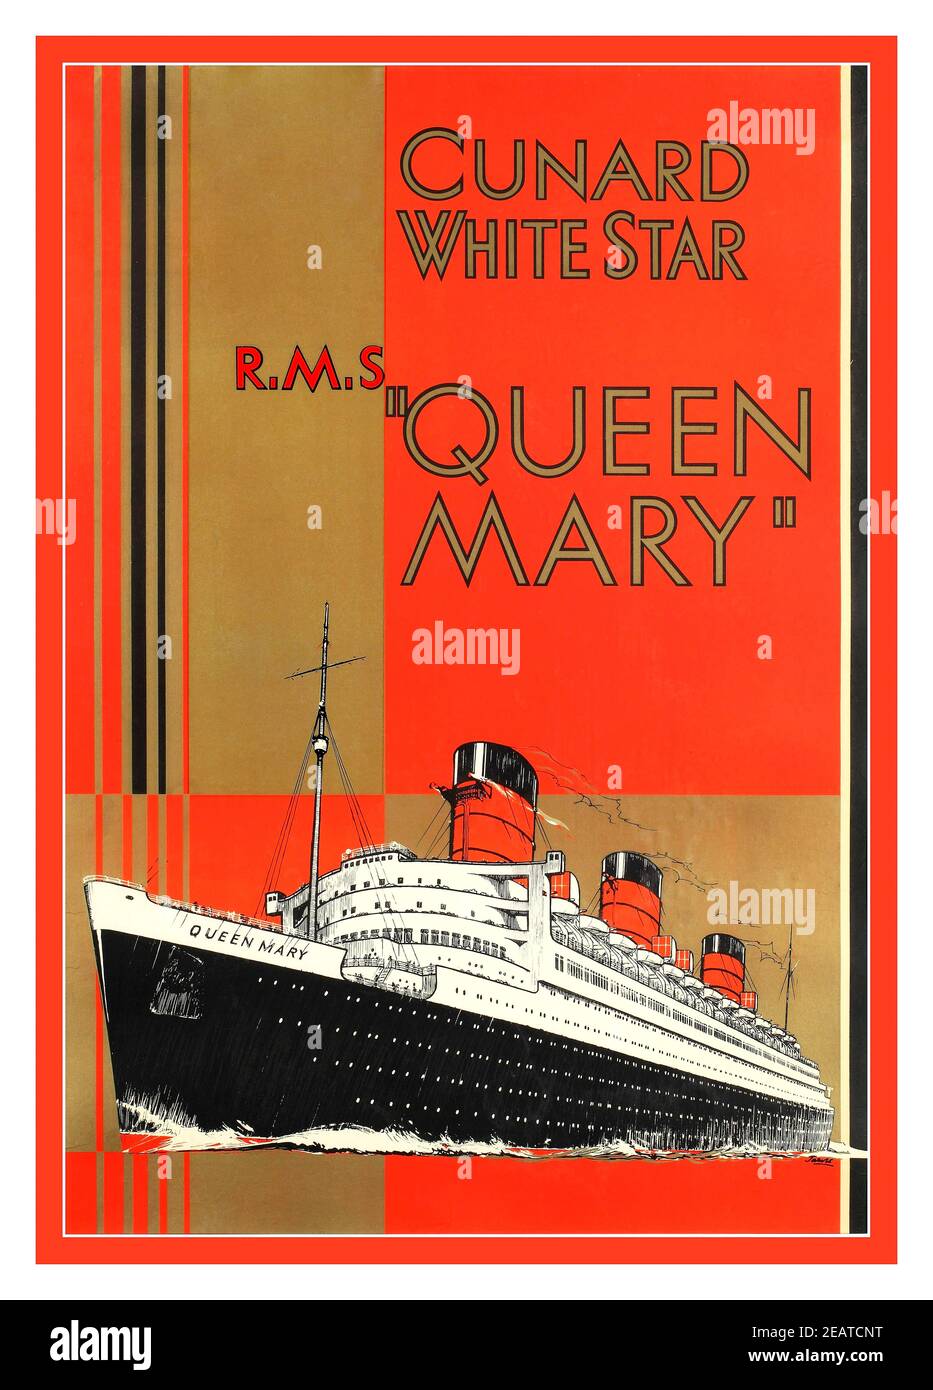 RMS QUEEN MARY 1930's CUNARD WHITE STAR Vintage Ocean Liner Poster by William Jarvis. Cunard White Star R.M.S Queen Mary, original Lithograph poster printed by British Colour Printing Co. Ltd 1936  RMS Queen Mary 1936 Advertising promotional poster for the flagship Ocean Liner of  Cunard-White Star Line  Poster design by William Howard Jarvis (1903-1964). Stock Photo